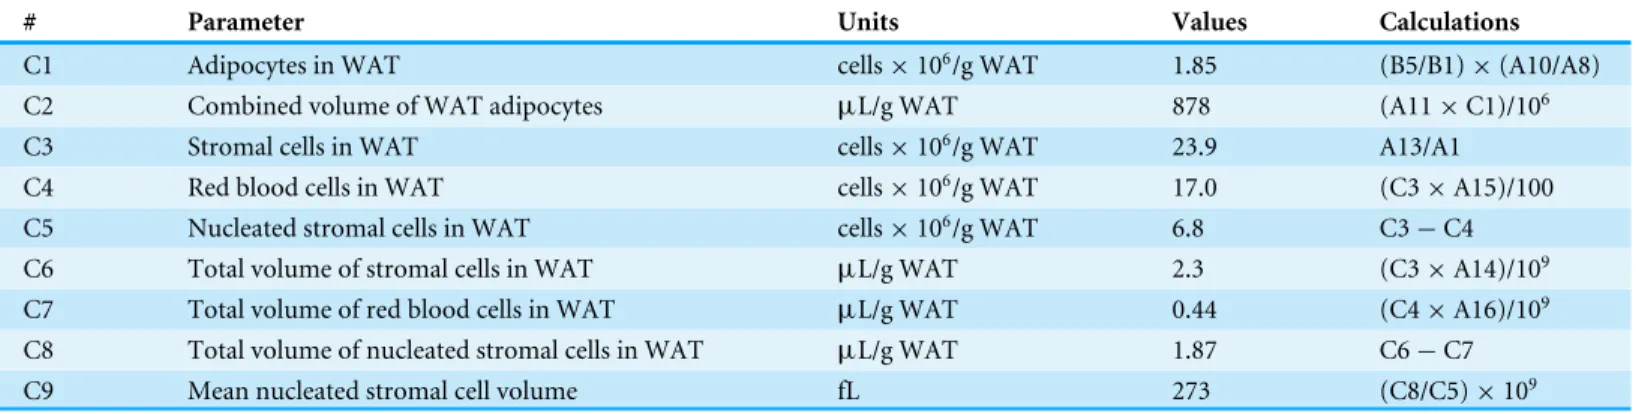 Table 3 Calculation of the volumes of cells from rat epididymal WAT. Data calculated using the experimental results presented in Tables 1 and 2.